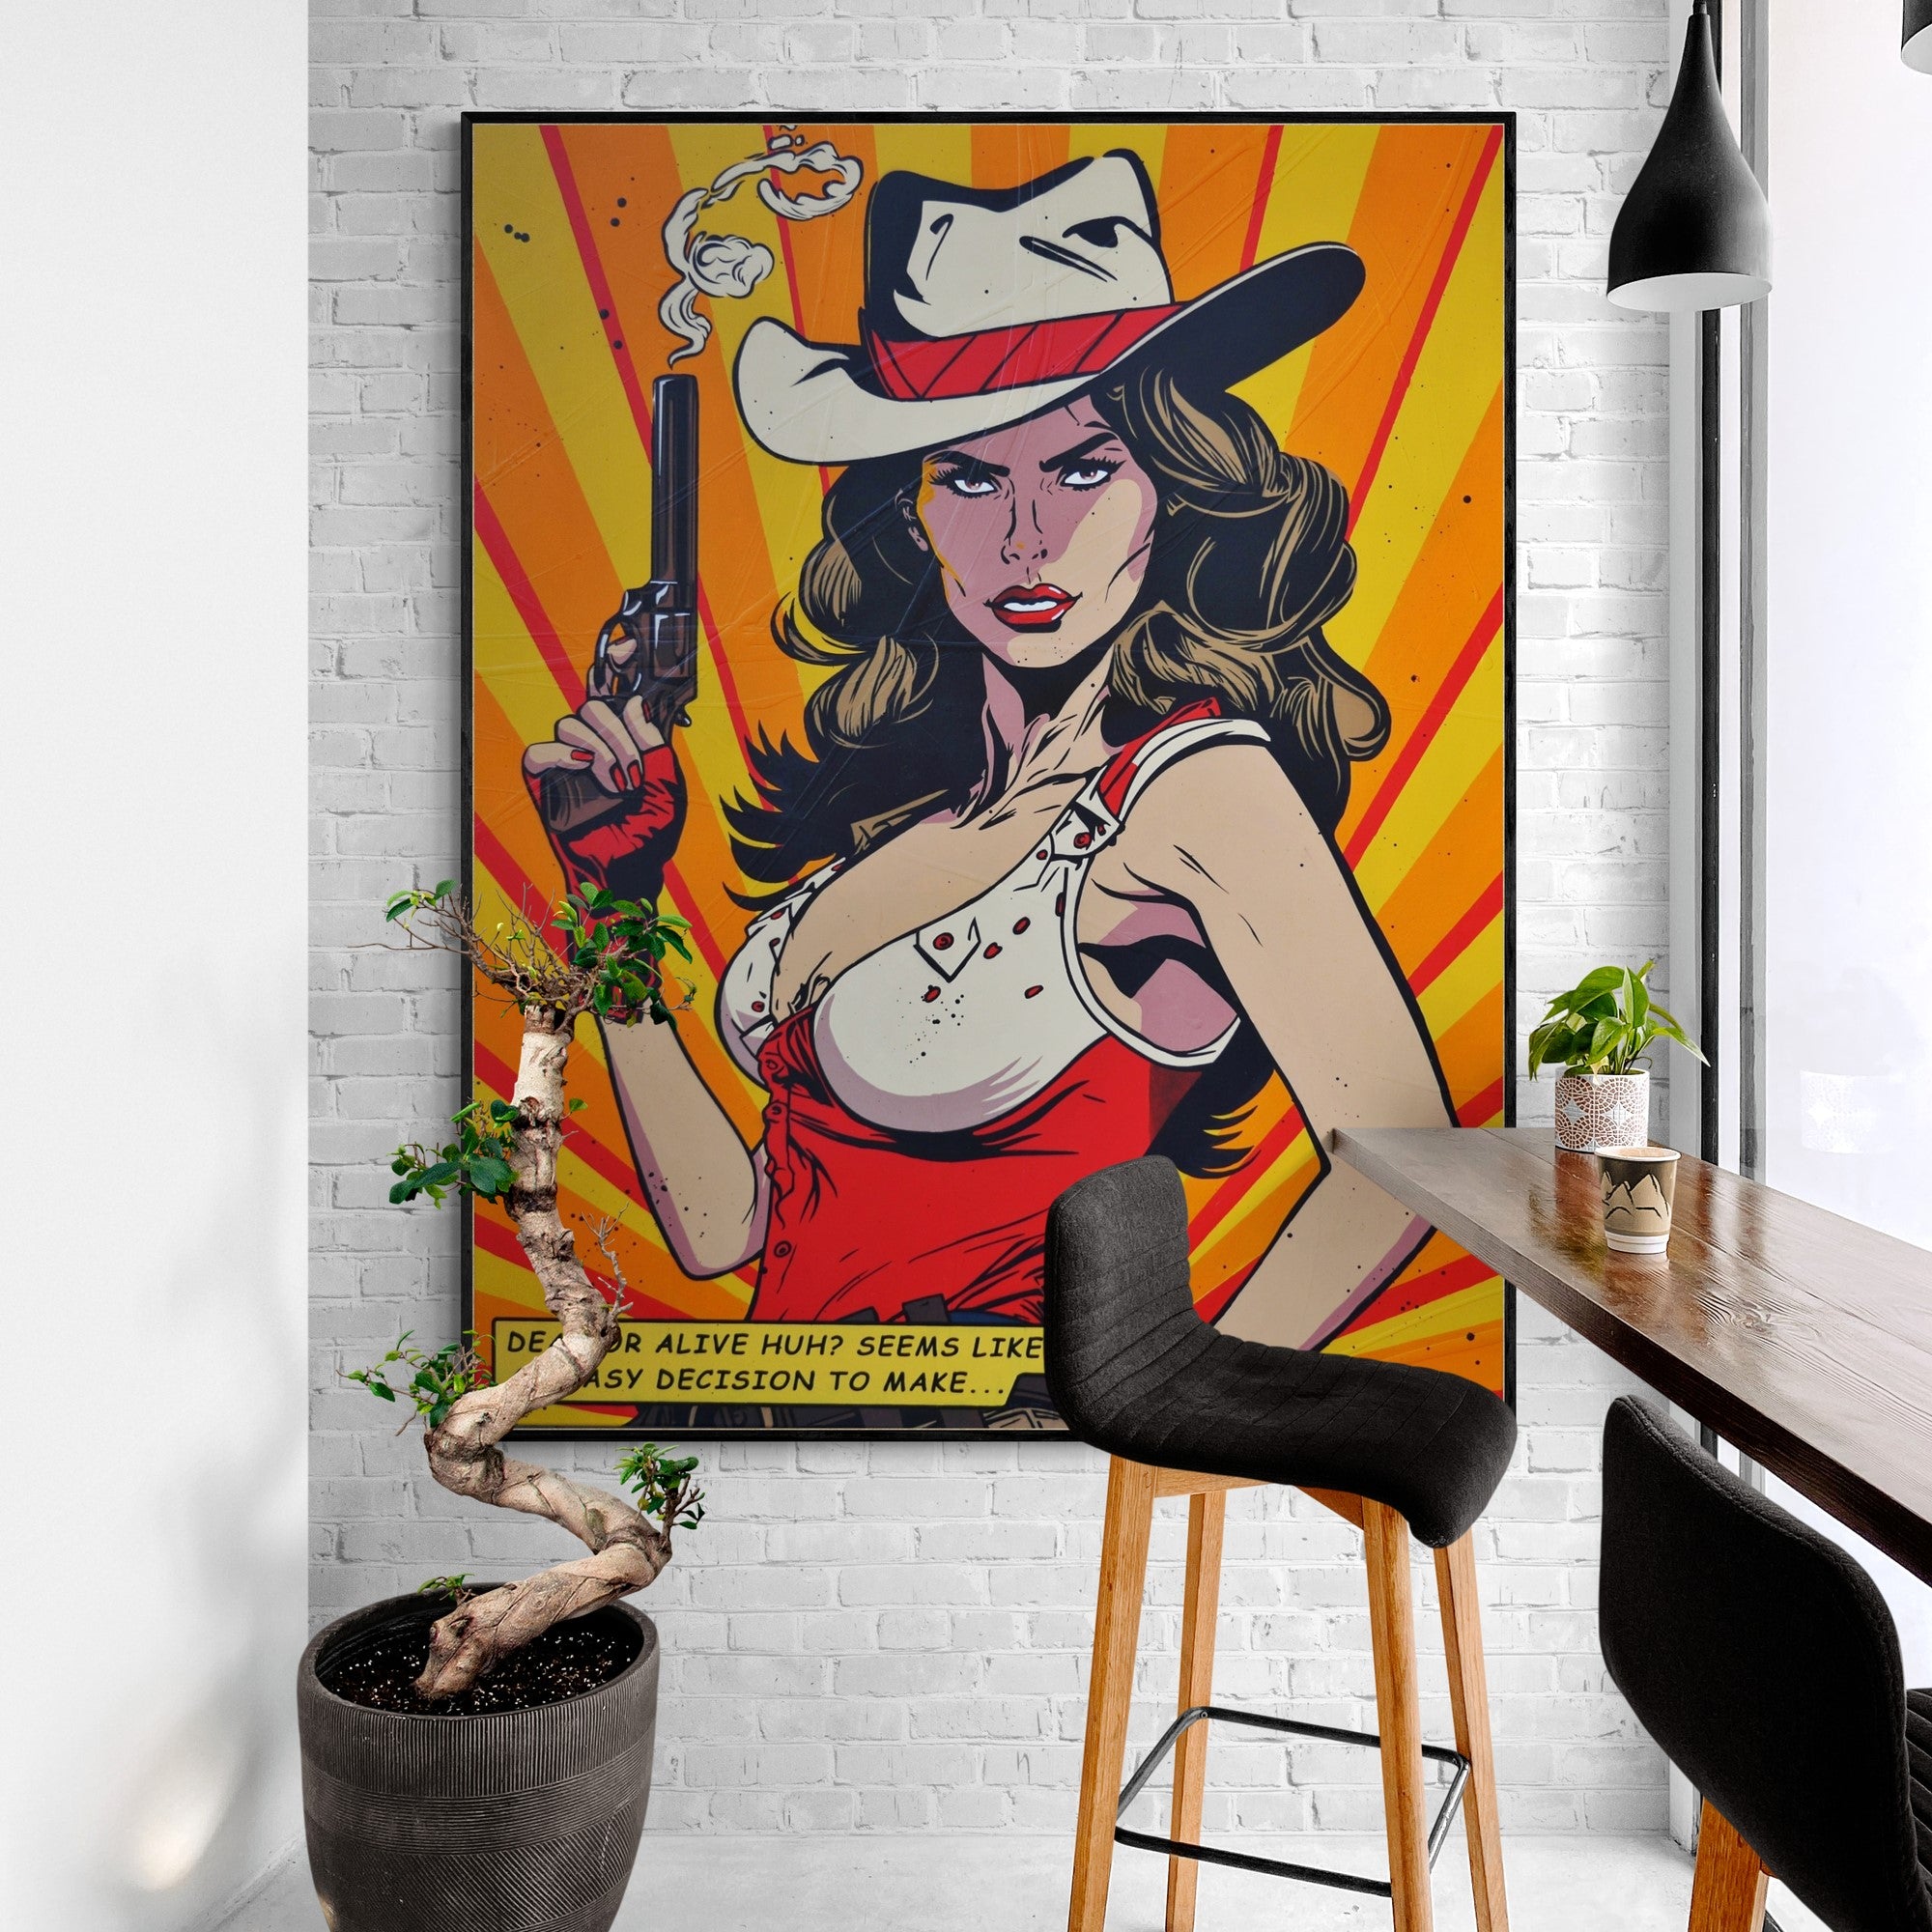 Choices 120cm x 150cm Cowgirl Textured Urban Pop Art Painting (SOLD)